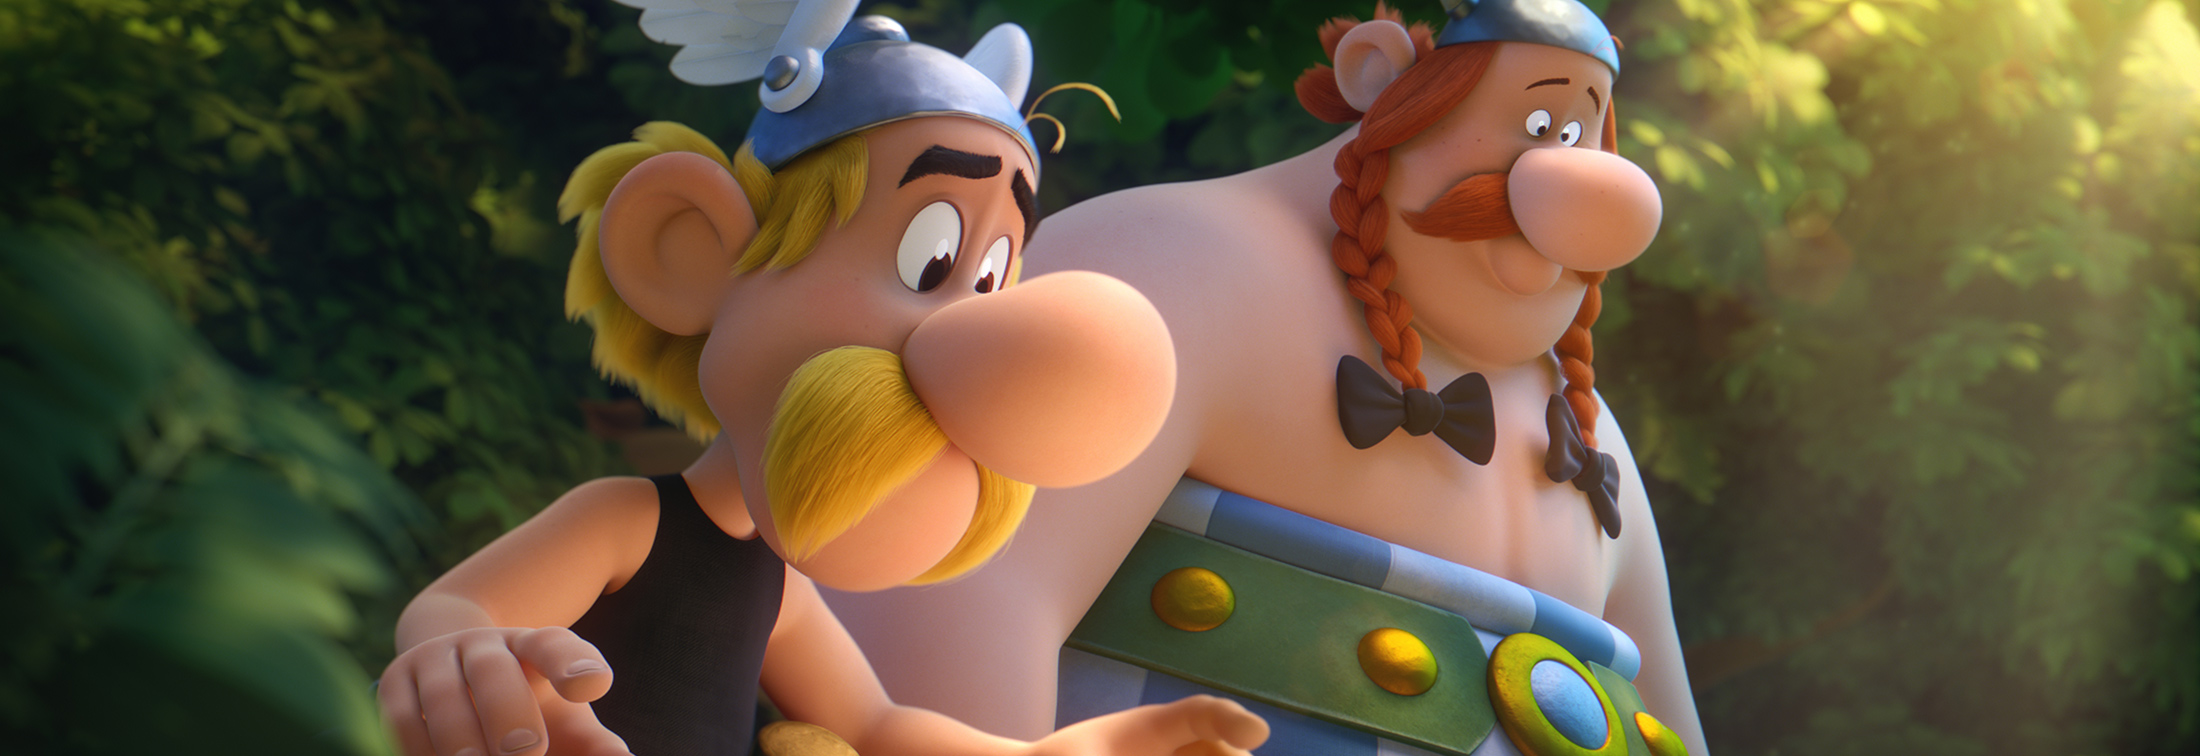 Asterix: The Secret of the Magic Potion - 60 years on, Asterix is as fresh as ever